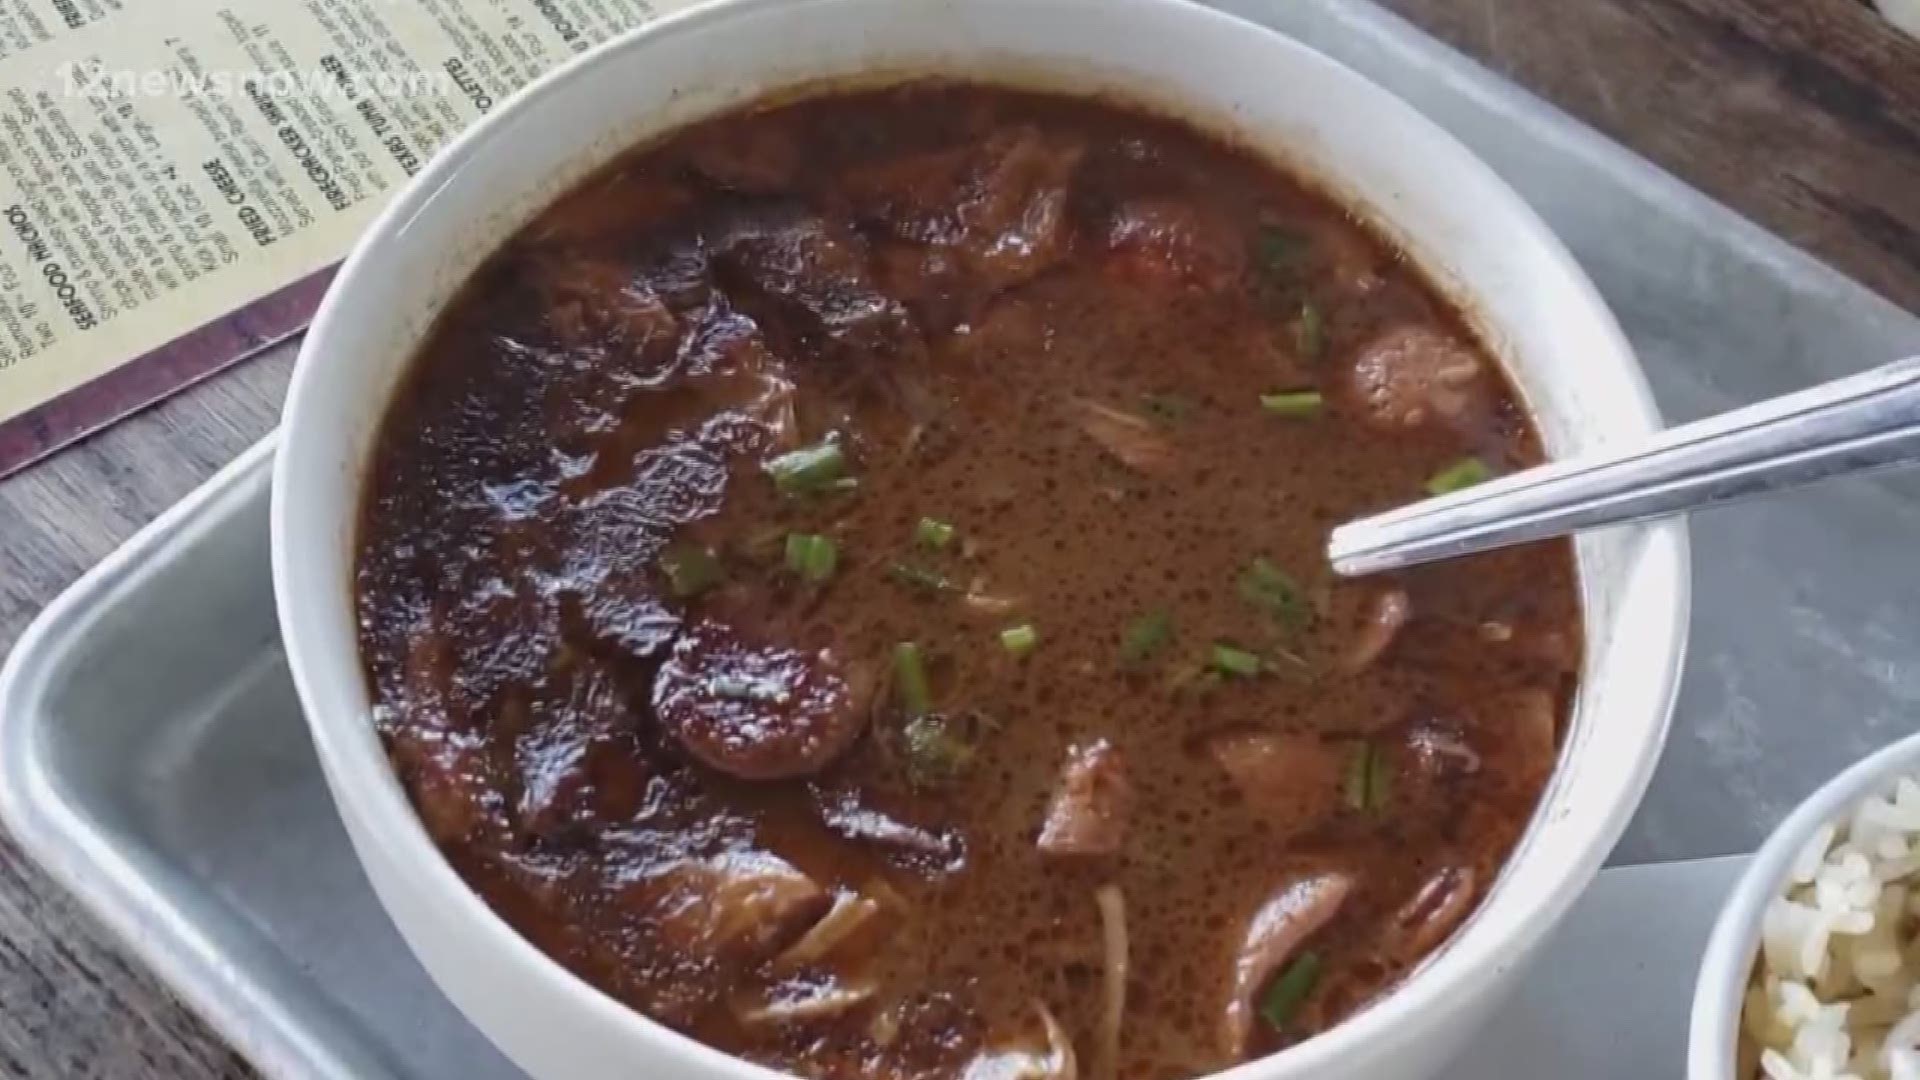 Stop by the Wheelhouse today and warm up with delicious chicken and sausage gumbo!